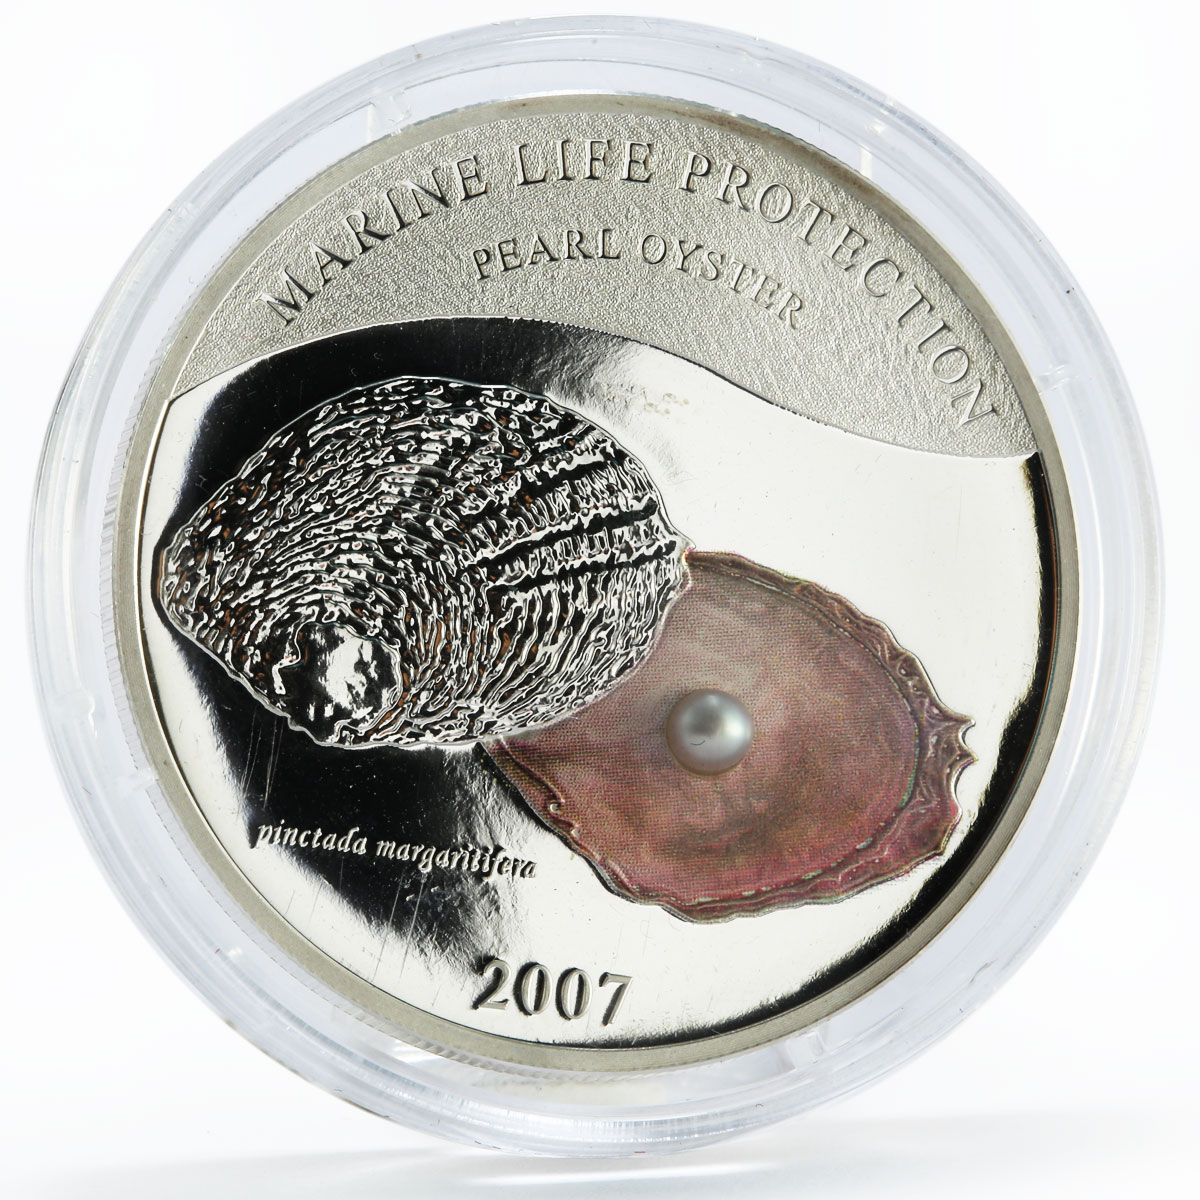 Palau 5 dollars Marine Life Protection series Pearl colored silver coin 2007